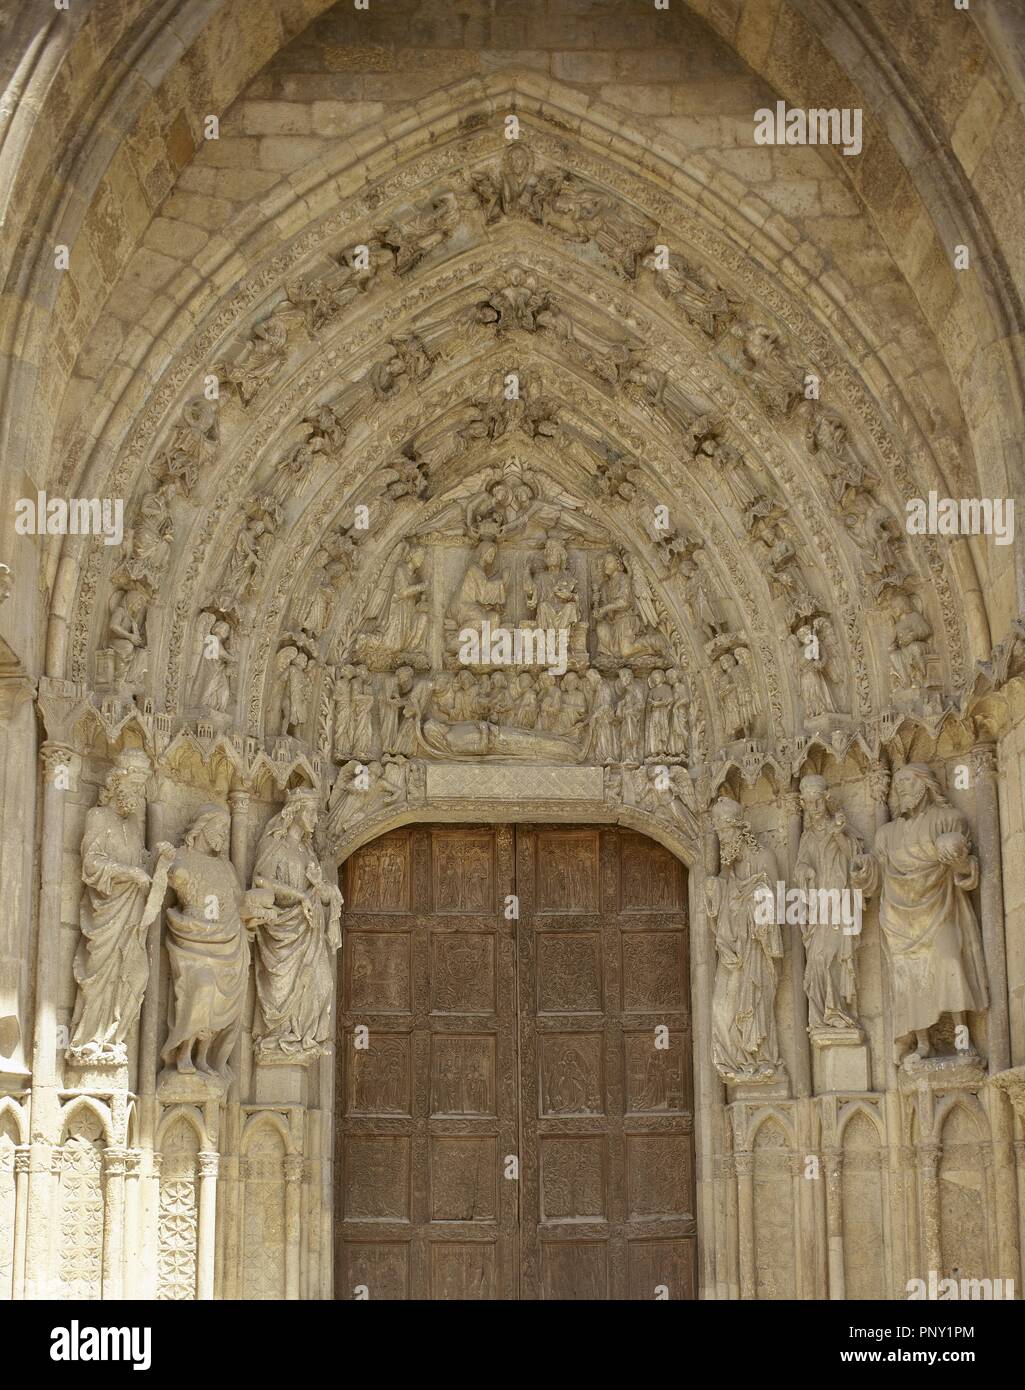 Spain, Castile and Leon, Leon. Santa Maria de Leon Cathedral. Gothic style. 13th century. Its design is attributed to the Master Enrique. Western facade. Right-hand Gate of San Francis (San Francisco), decorated with figures of prophets and the Coronation of the Virgin. Stock Photo